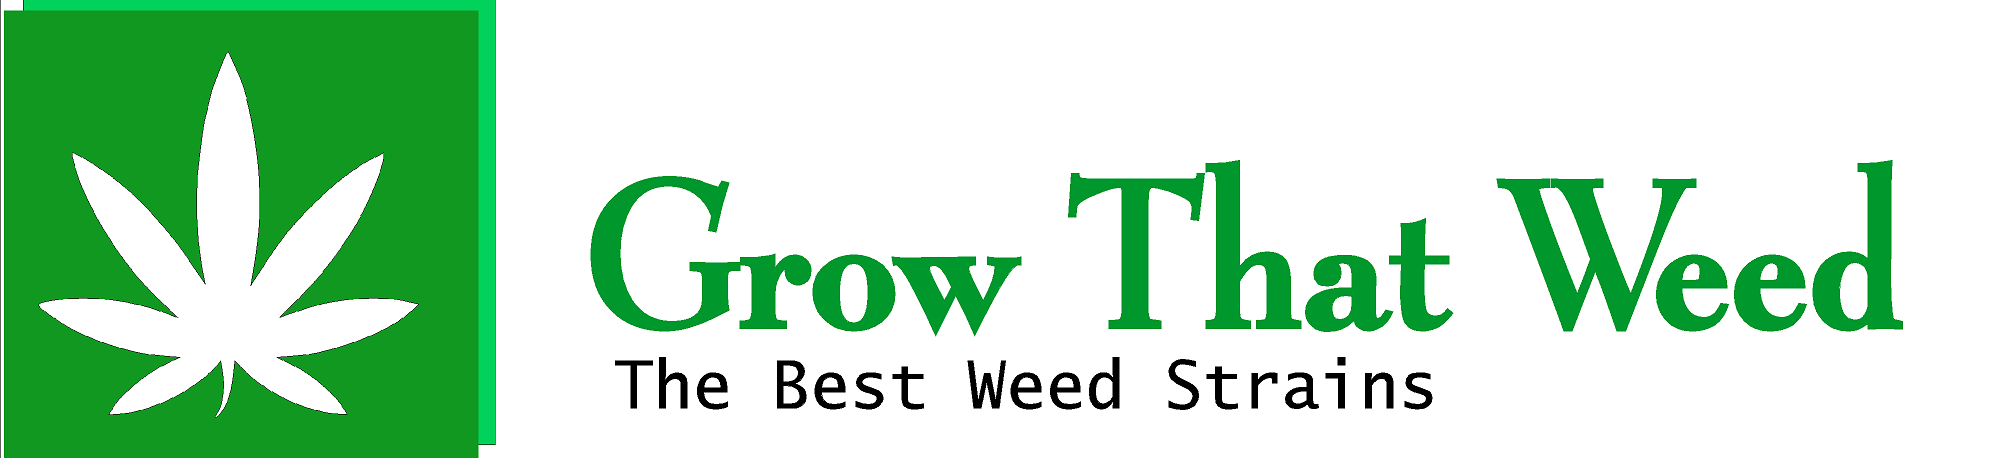 Grow That Weed